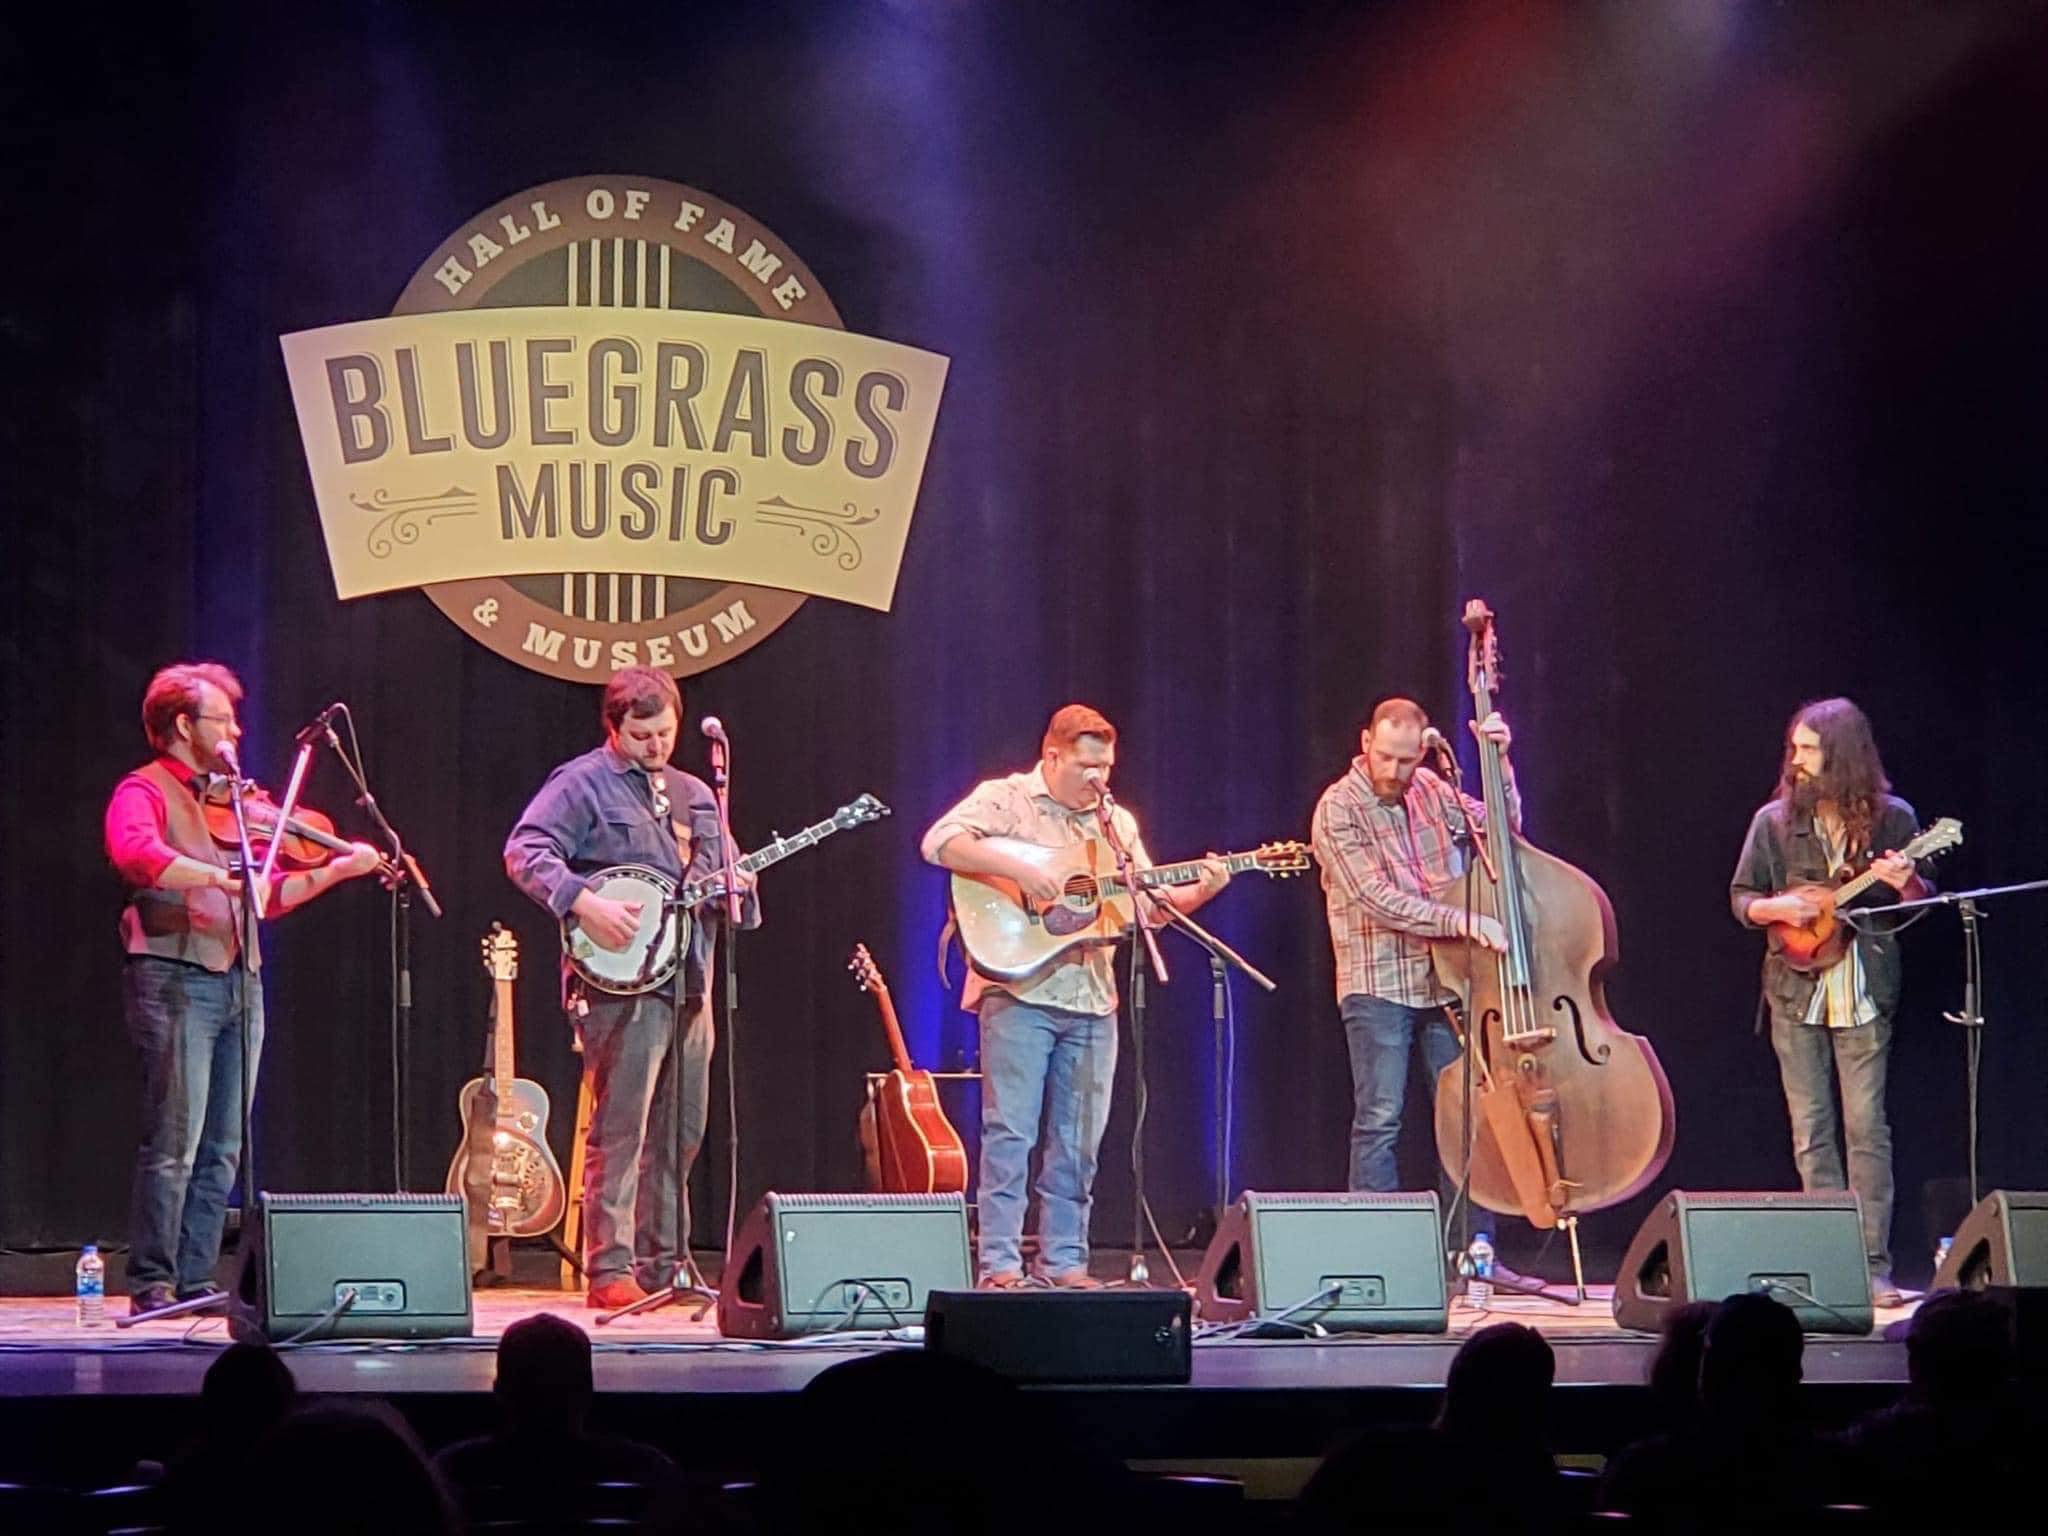 Bluegrass band on stage